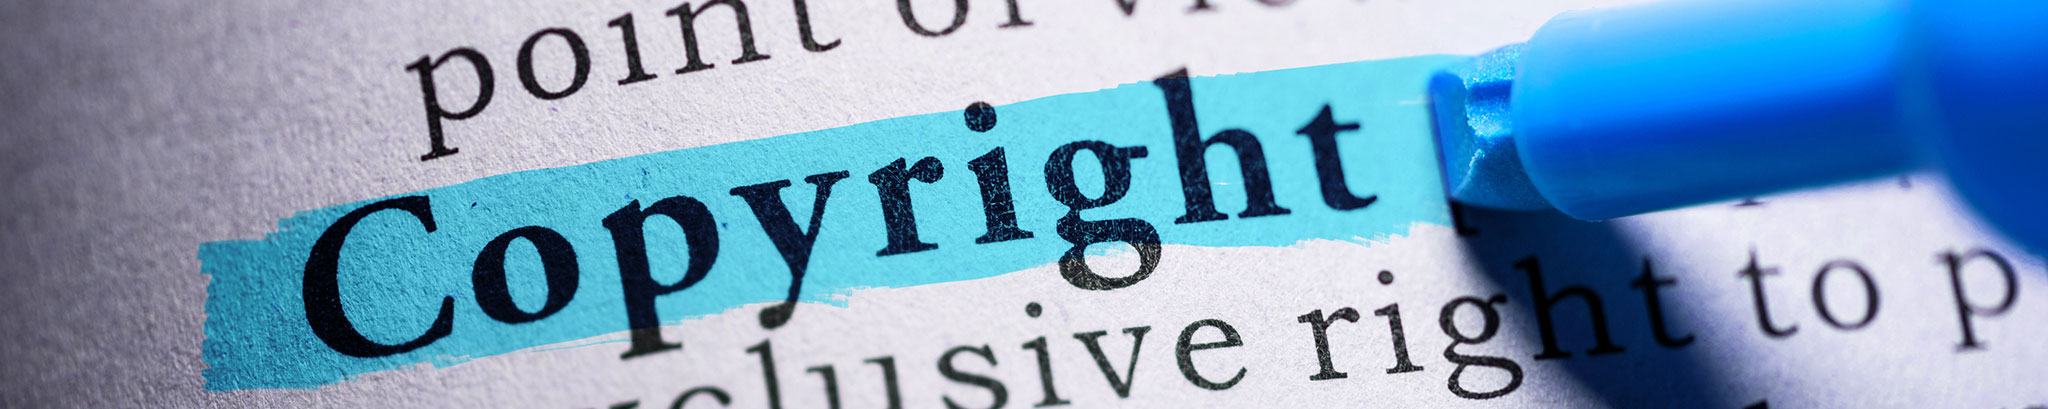 The word Copyright highlighted in blue